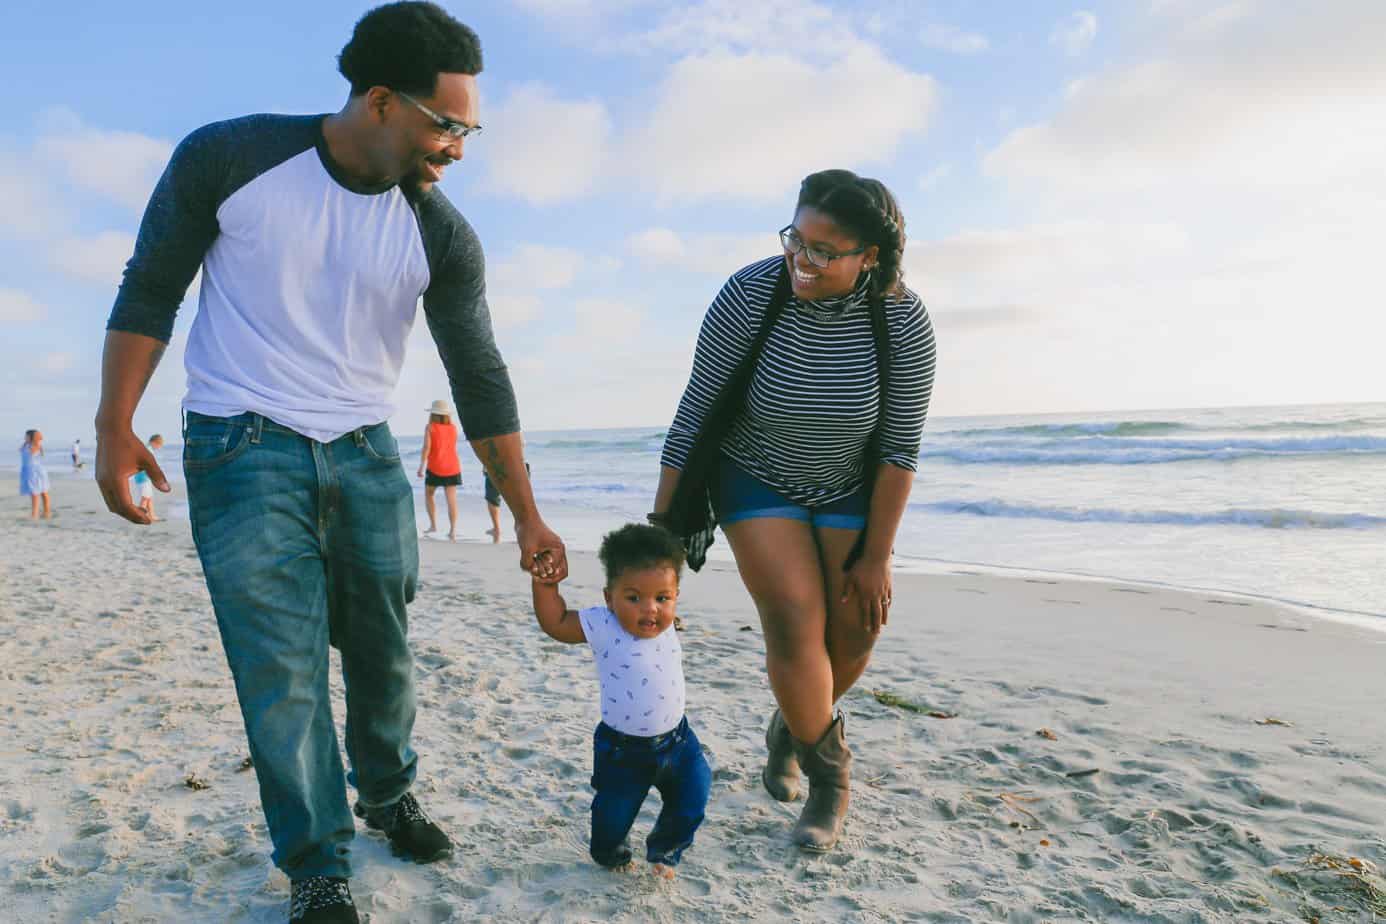 A family of three explores a beach; mom and dad hol donto the hands of their child. Walking on beach is one thing to do instead of drinking.